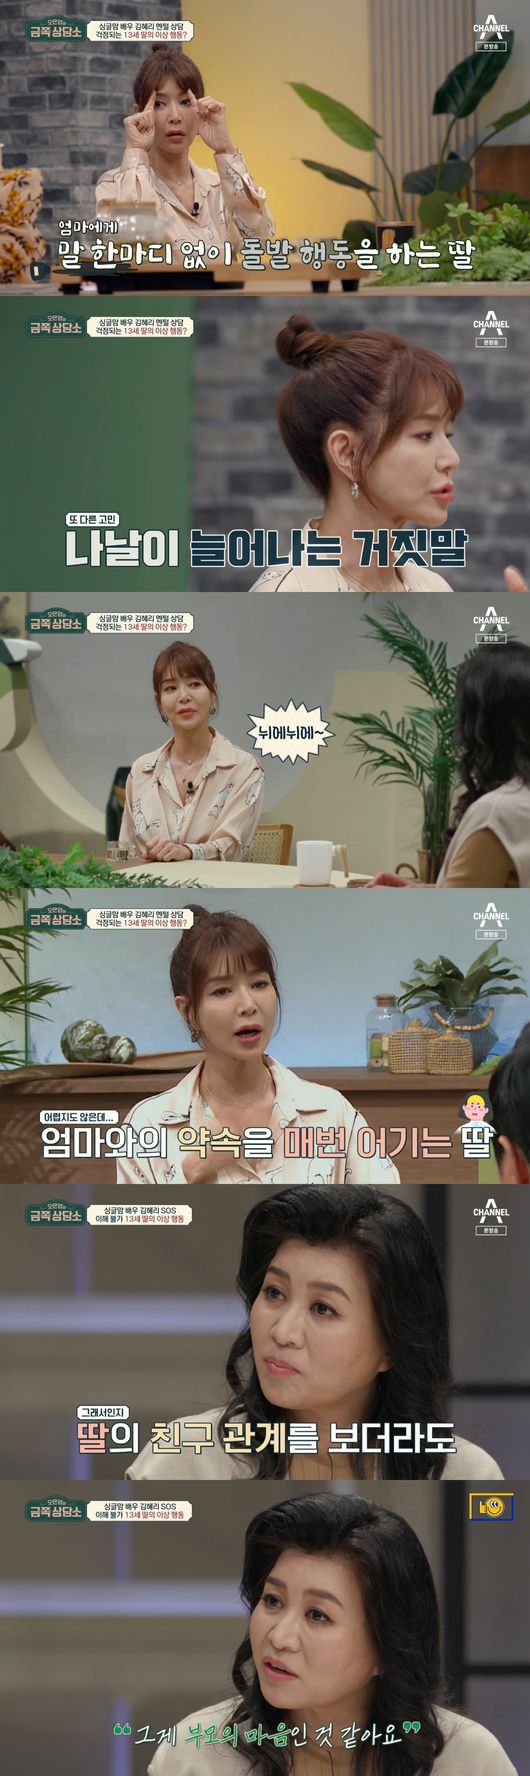 Hye-ri Kim has spoken out about her 13-year-old daughters concerns.On the 19th channel A Oh Eun-youngs Gold Counseling Center, Actor Hye-ri Kim talked about his 13-year-old daughters troubles and difficulties.On the day Hye-ri Kim said, I got married late and had a child at forty.I am a daughter who is so precious to me, so I am raising it hard. I have been fighting my daughter for a long time.The child seems to be changing a little bit strangely and I do not know what to do. Hye-ri Kim said, What was she doing in the room alone? I went in and she was wearing makeup. One day she was pushing her eyebrows and bleaching her bangs.I asked him why, and he said he just wanted to try. I am worried because I do not do it. Hye-ri Kim said: When you talk to me, you lie. When you ask if youre on your cell phone, you were looking at your homework.I do not know why I lie first, he said. In the past, the child who was still still is called Nue. On this day, a guest appeared to oppose Hye-ri Kim: Park Ye-eun, daughter of Hye-ri Kim.Oh Eun Young said, I was curious about Park Ye-euns thoughts and minds, he said. I told you I had a lot of fights with my mother.My mom says theres a lot of conflict, but I dont think of conflict, Park Ye-eun said, followed by Oh Eun Young, who said, She thought she was lying.Why is that? asked Park Ye-eun, who said, My mother is angry and angry, not trying to get hurt.Park Ye-eun said, I was doing my homework while watching movies, and my mother said that you were watching movies all the time.I took my cell phone and threw all my things away and told me to go out, he said. I do not know why my mother is doing it and I often hate it.I heard that my mother said that she had dark makeup and bleached, said Jeong Hyeong-don.Park Ye-eun laughed, saying, People may do that.Park Ye-eun then looked at Oh Eun Young and said, Its like a teachers bodhisattva.Hye-ri Kim said, Thats what Im angry about. My mothers heart is hard, but I have no idea. I think its not hard.It is a small thing, but why do not you do it, but it is angry because it is a small thing every day. Oh Eun Young said, The problem is deep.Oh Eun Young said, I do not understand the childs mind, but I have to change my perception. My mother needs to raise it properly, so there is a growing conflict because she wants something.On this day, Oh Eun Young advised Hye-ri Kim about the adult separation anxiety and explained how.